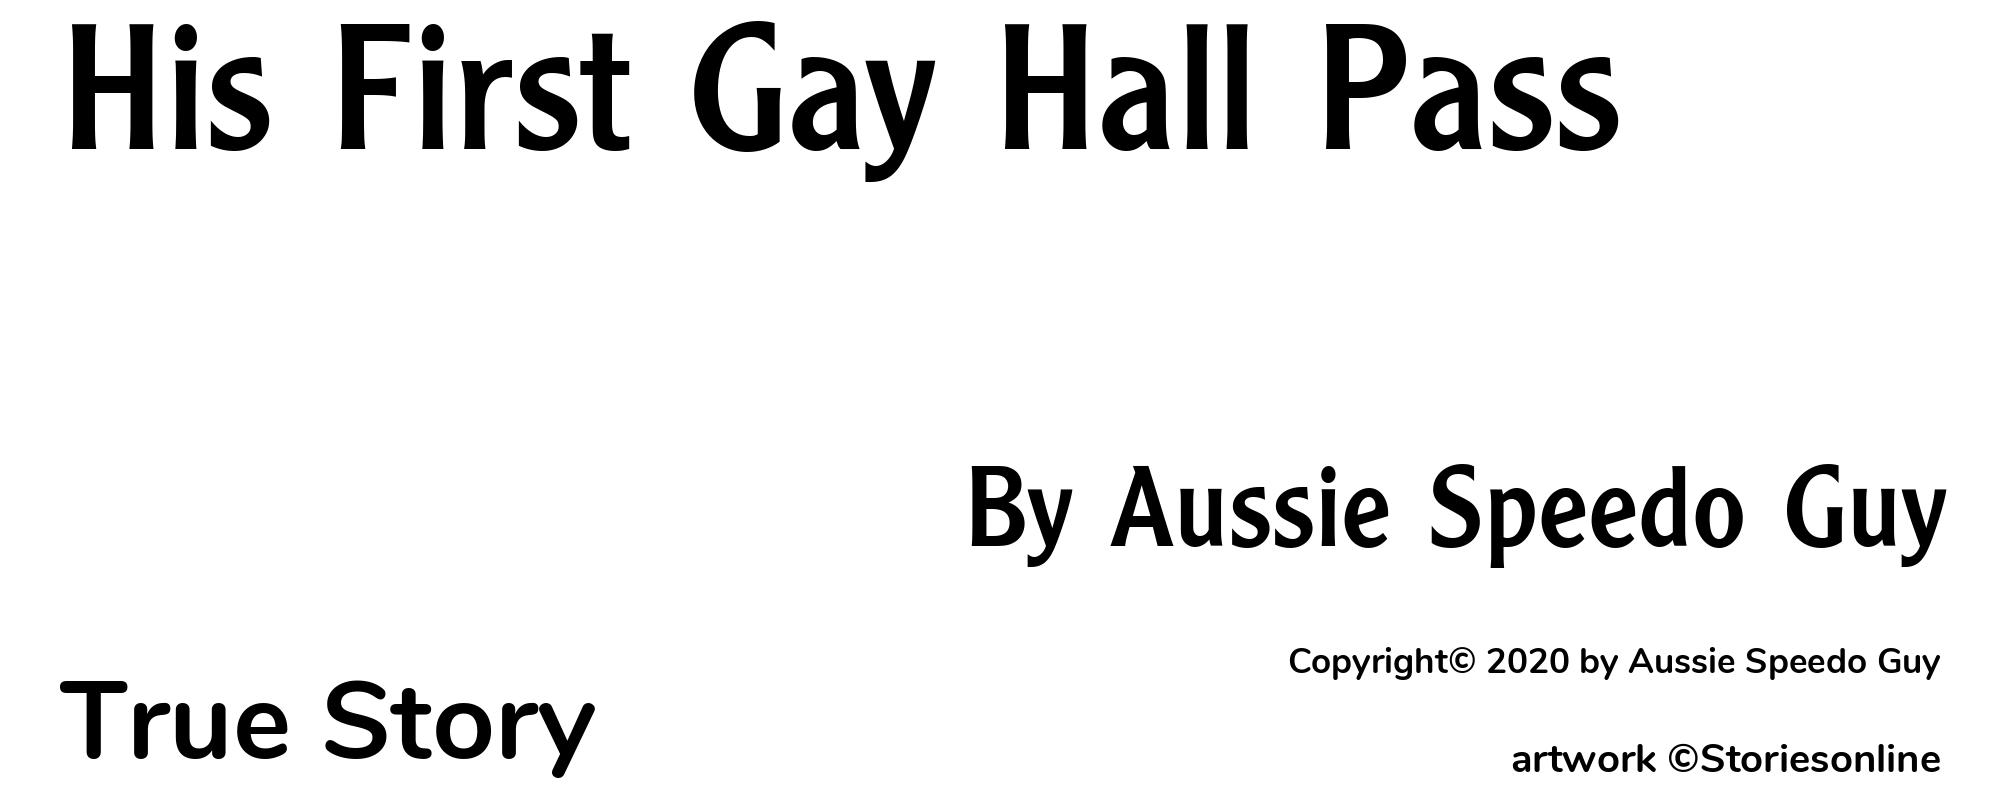 His First Gay Hall Pass - Cover